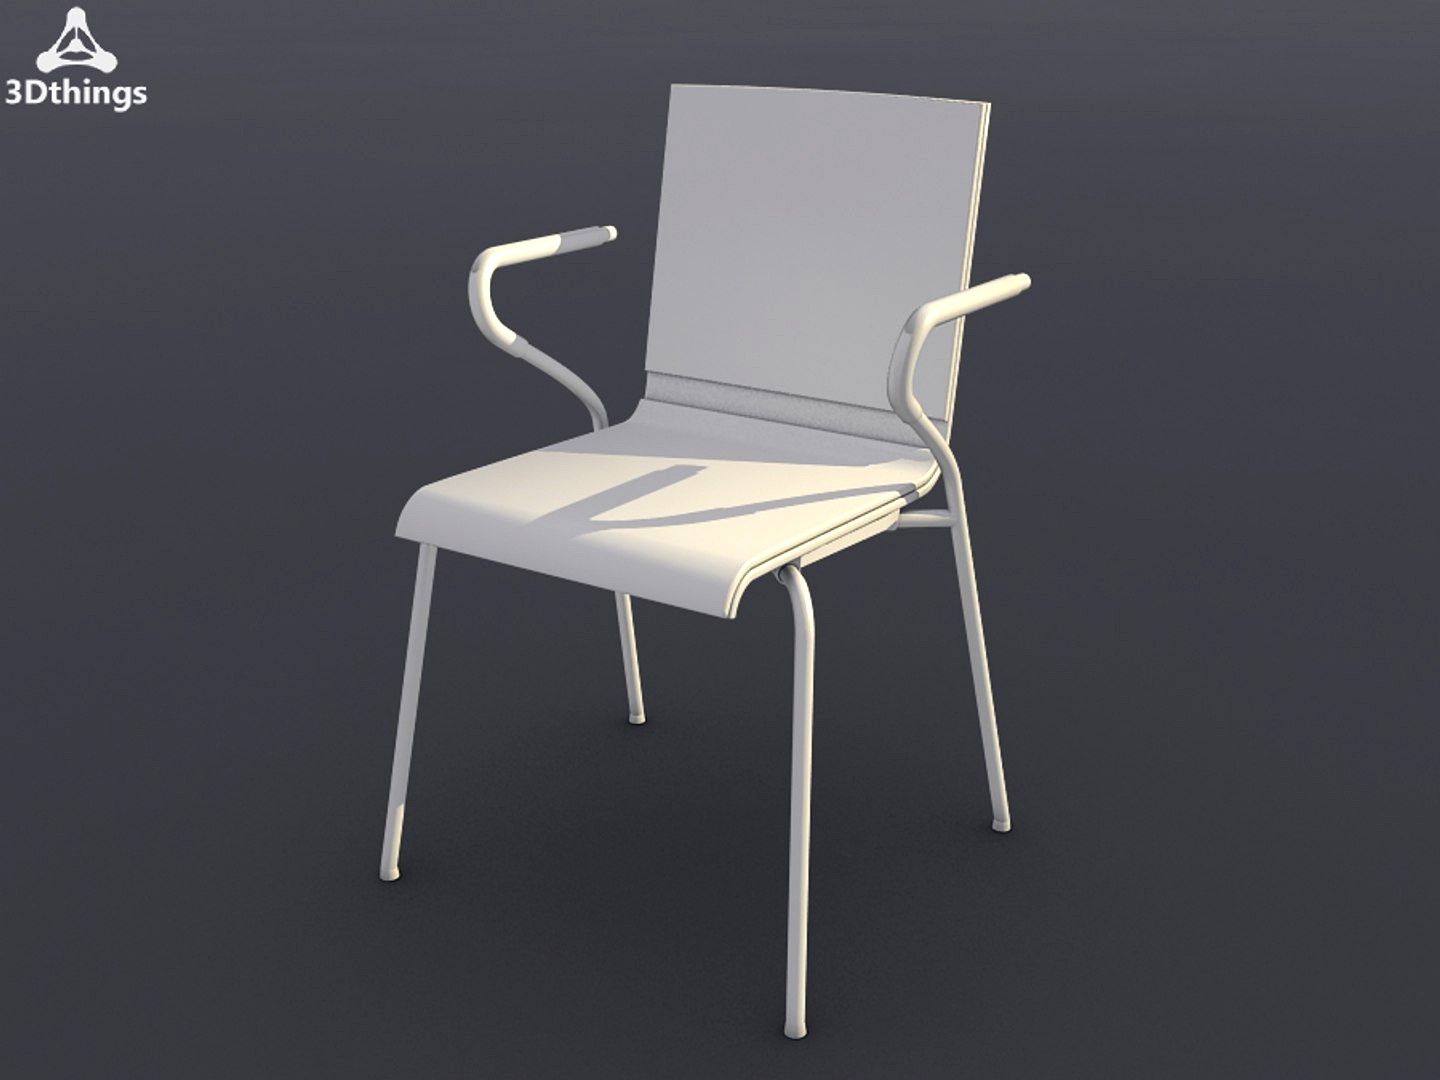 Ole 4-leg model with armrests integrated in steel frame with seat and backrest cusion on request